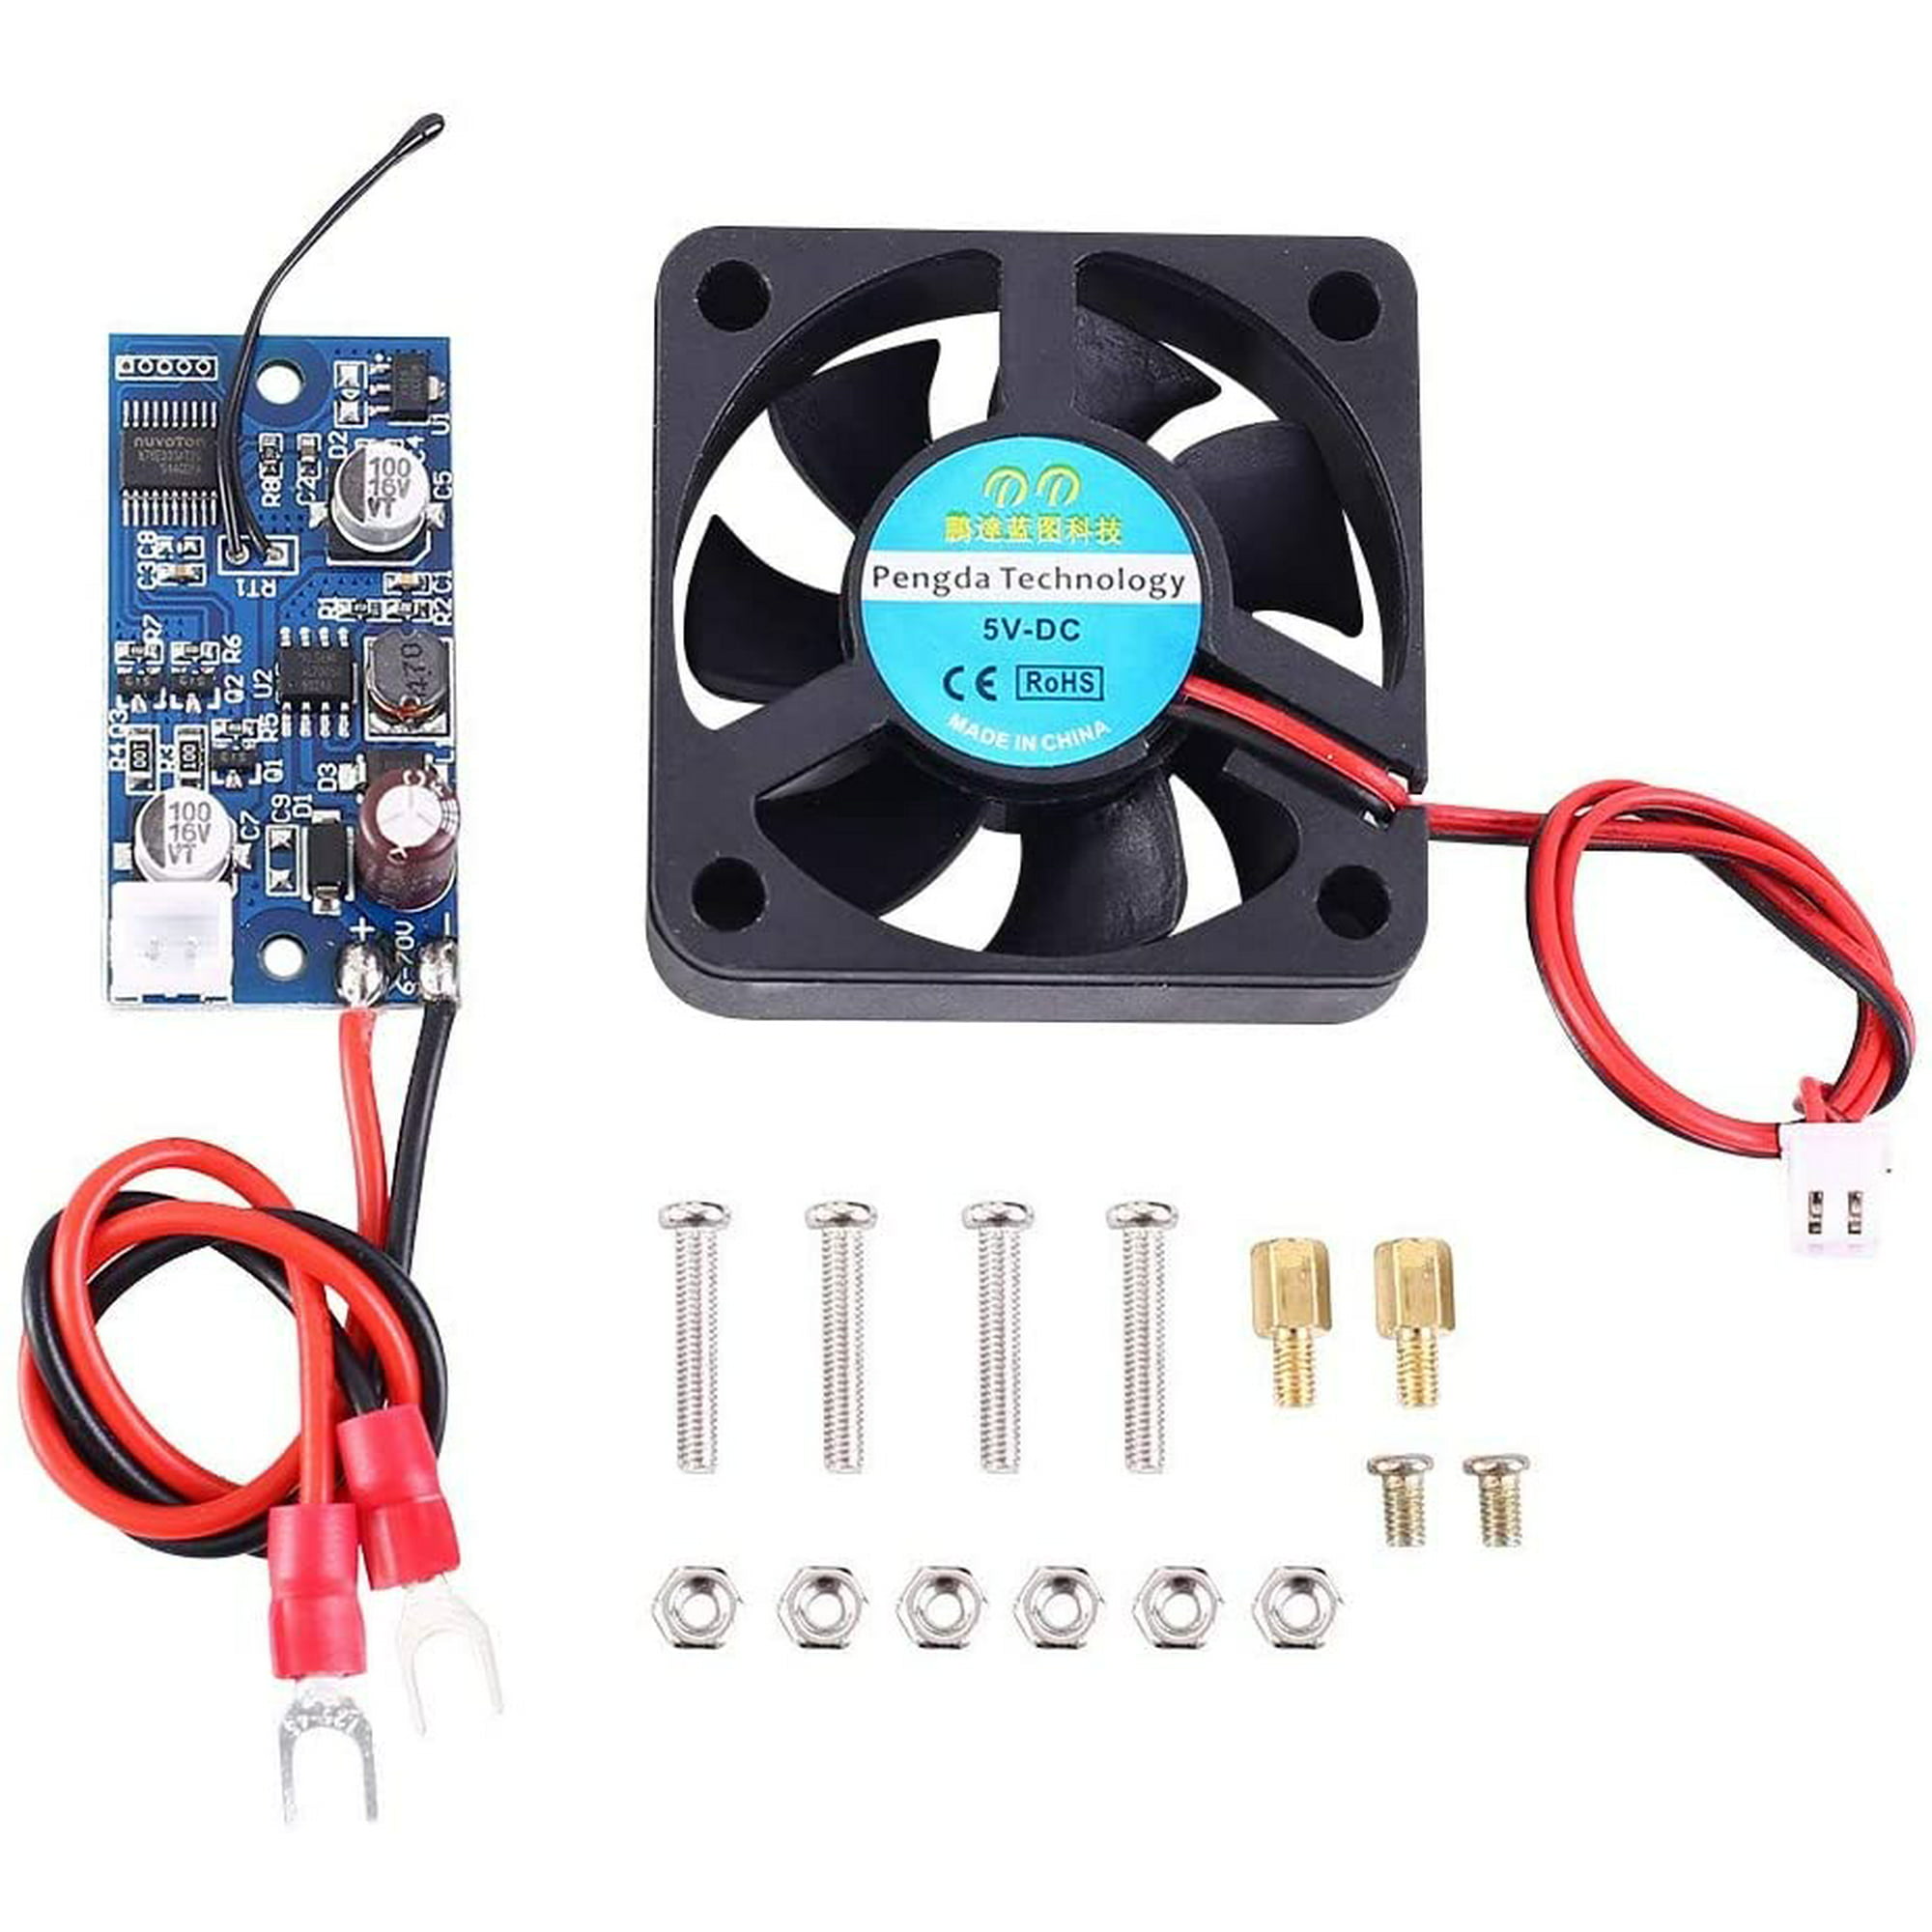 Smart Temperature Controller, CPU Fan Speed Module, DC 6-70V with & Fan for PC Case Cooling | Walmart Canada